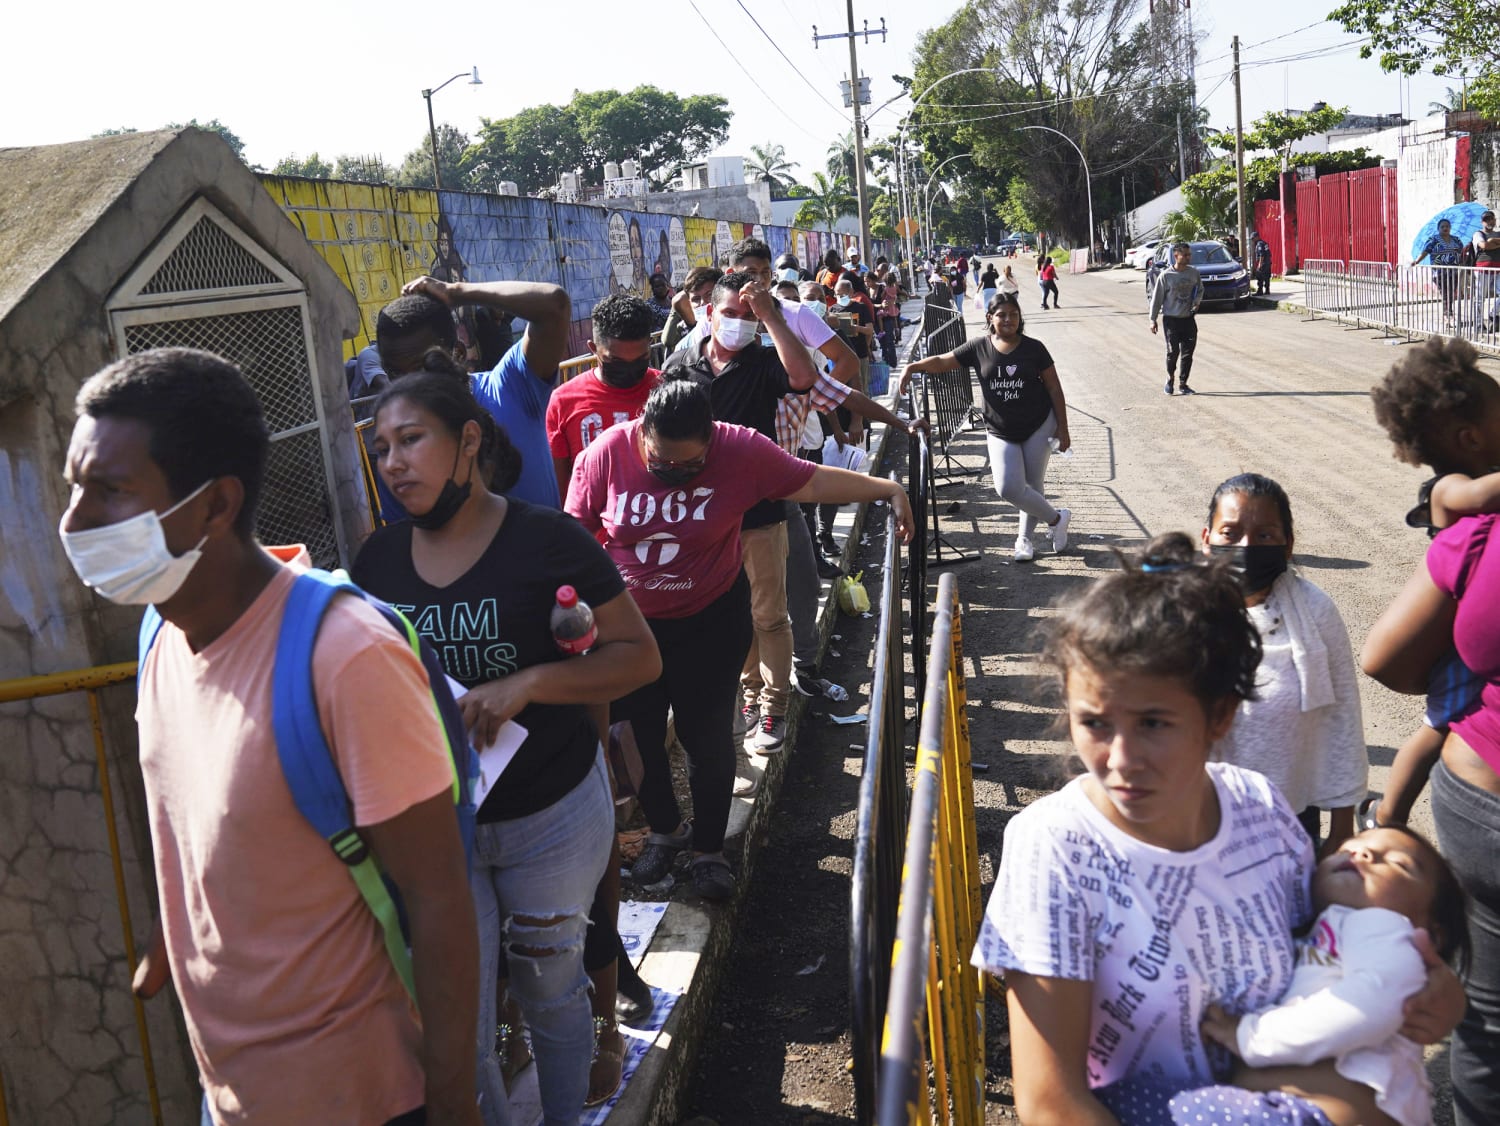 Thousands seeking asylum crowd Mexico refugee offices, fearing a U.S. policy change